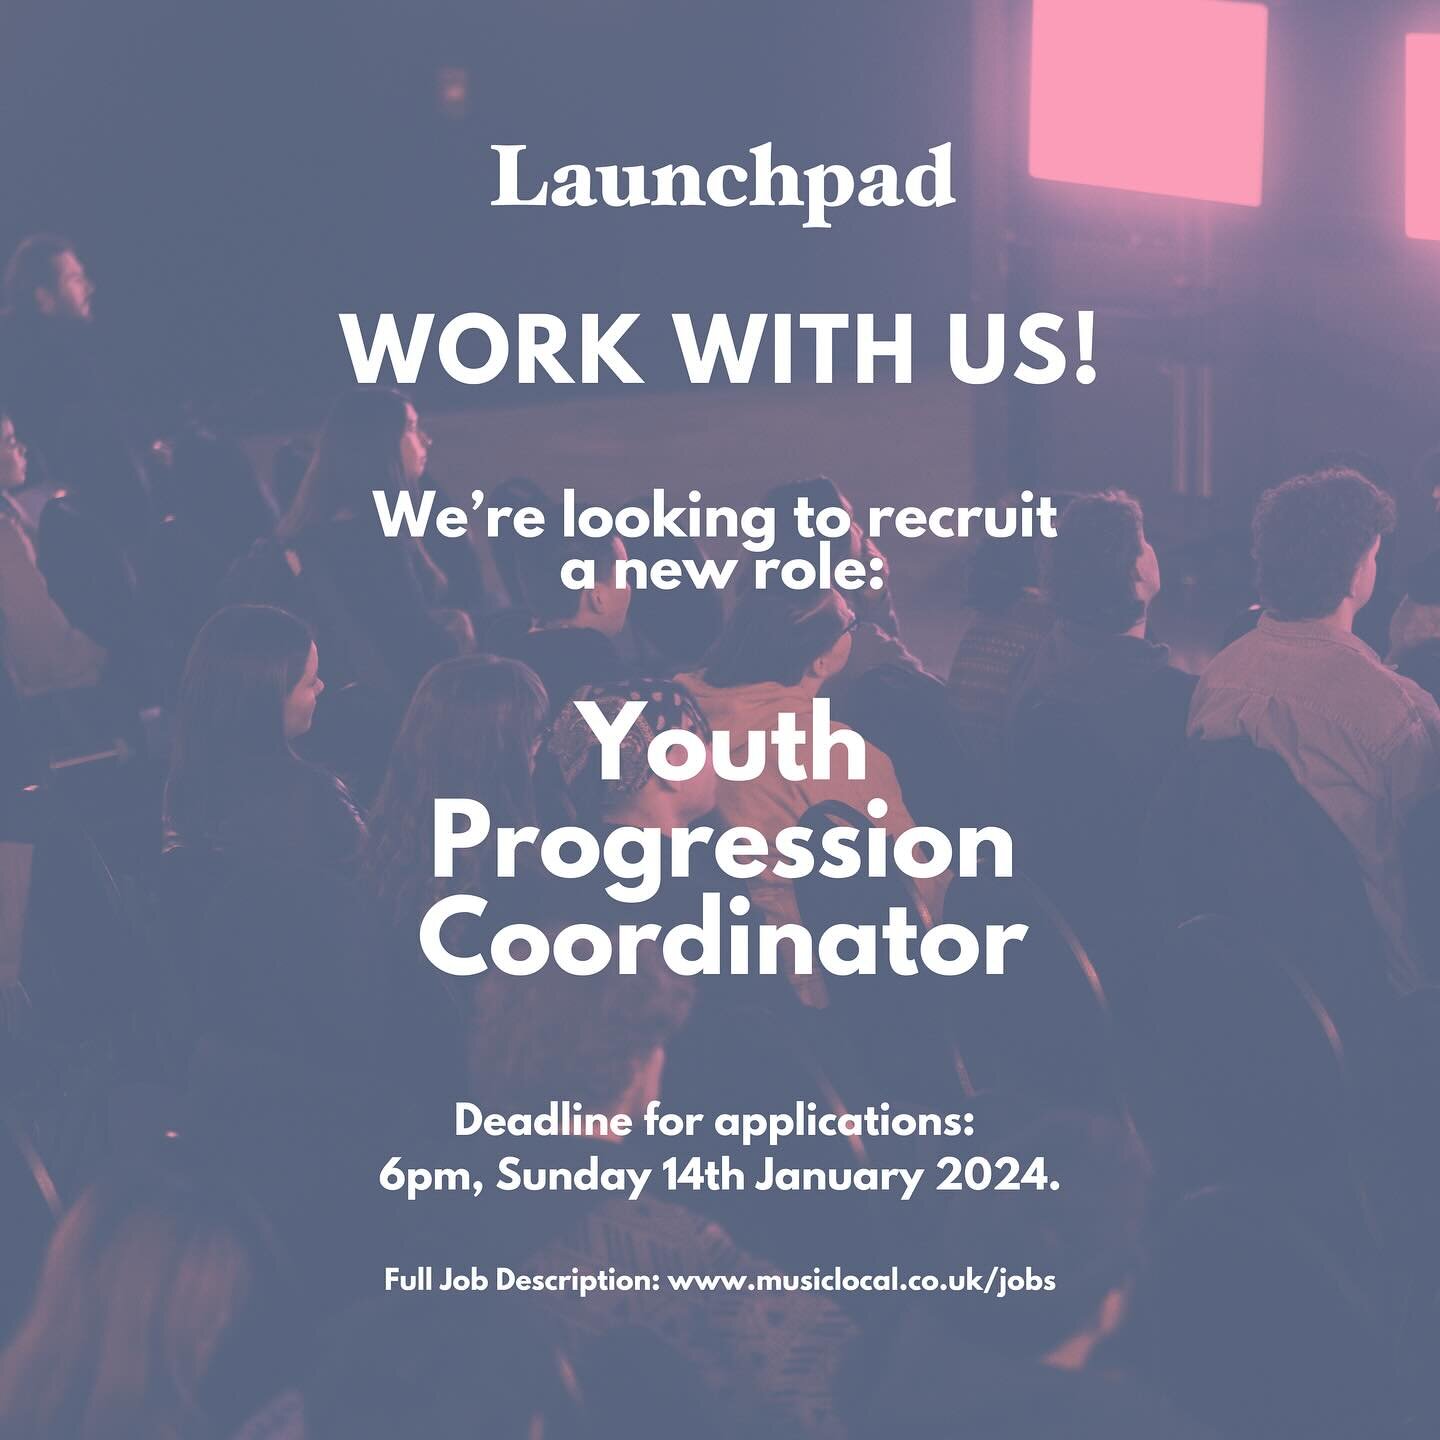 We&rsquo;re hiring a Youth Progression Coordinator! 🧑&zwj;🏫 

This new role will help us build relationships with education partners, and deliver activity to promote music careers and opportunities to young people.

Find out more &amp; how to apply